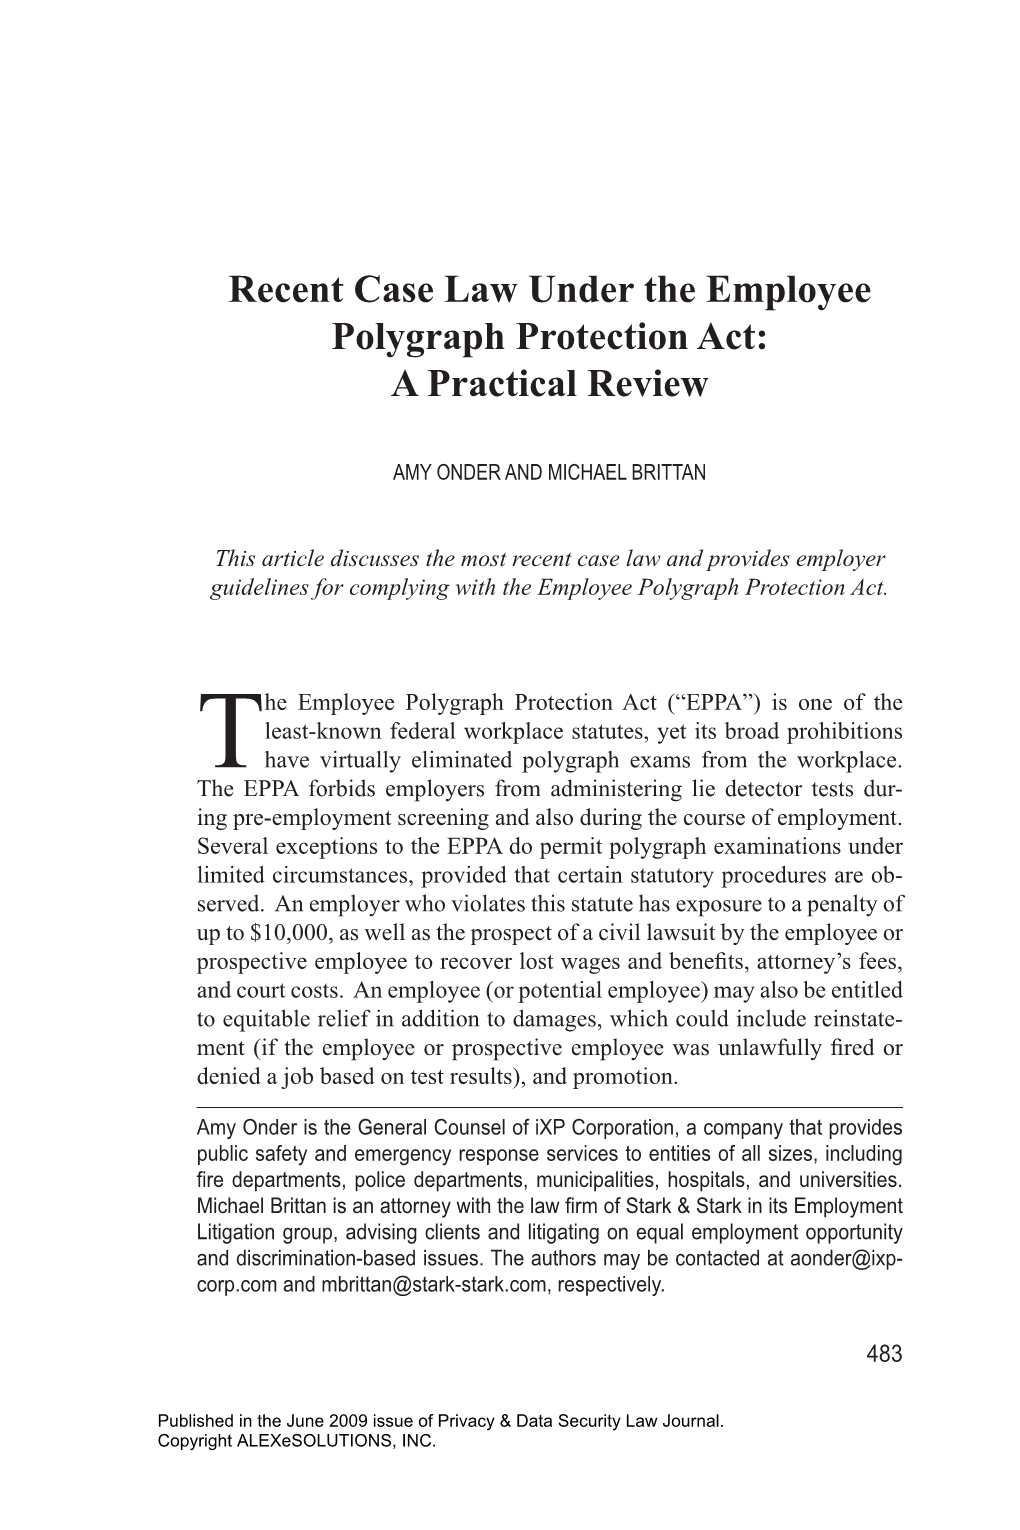 Recent Case Law Under the Employee Polygraph Protection Act: a Practical Review